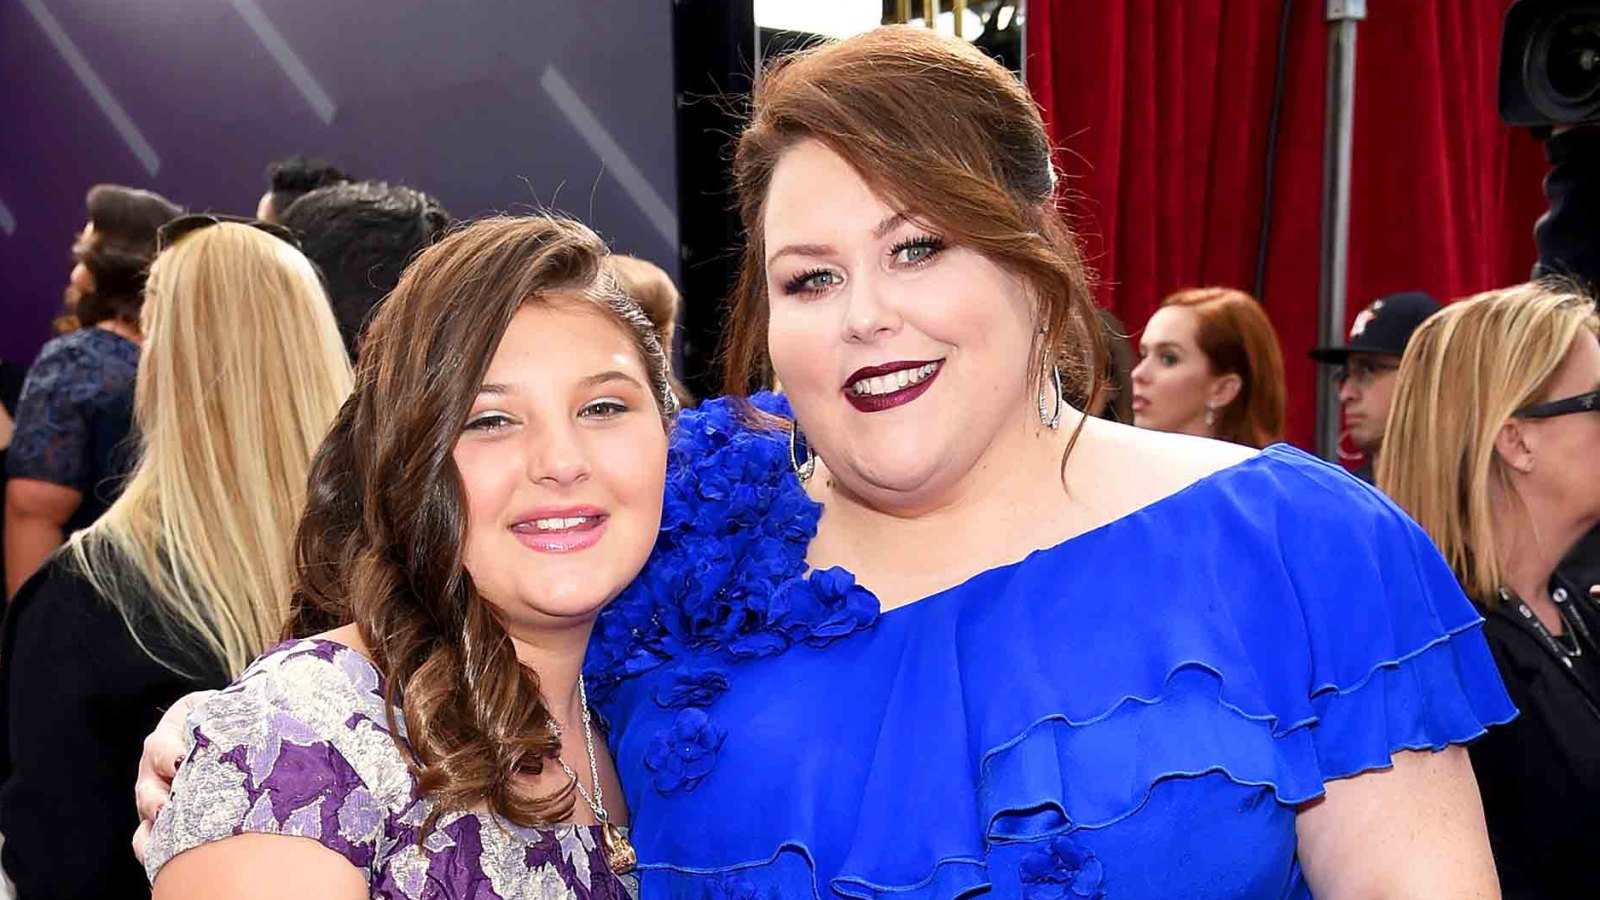 Mackenzie Hancsicsak and Chrissy Metz attend the 24th Annual Screen Actors Guild Awards at The Shrine Auditorium on January 21, 2018 in Los Angeles, California.